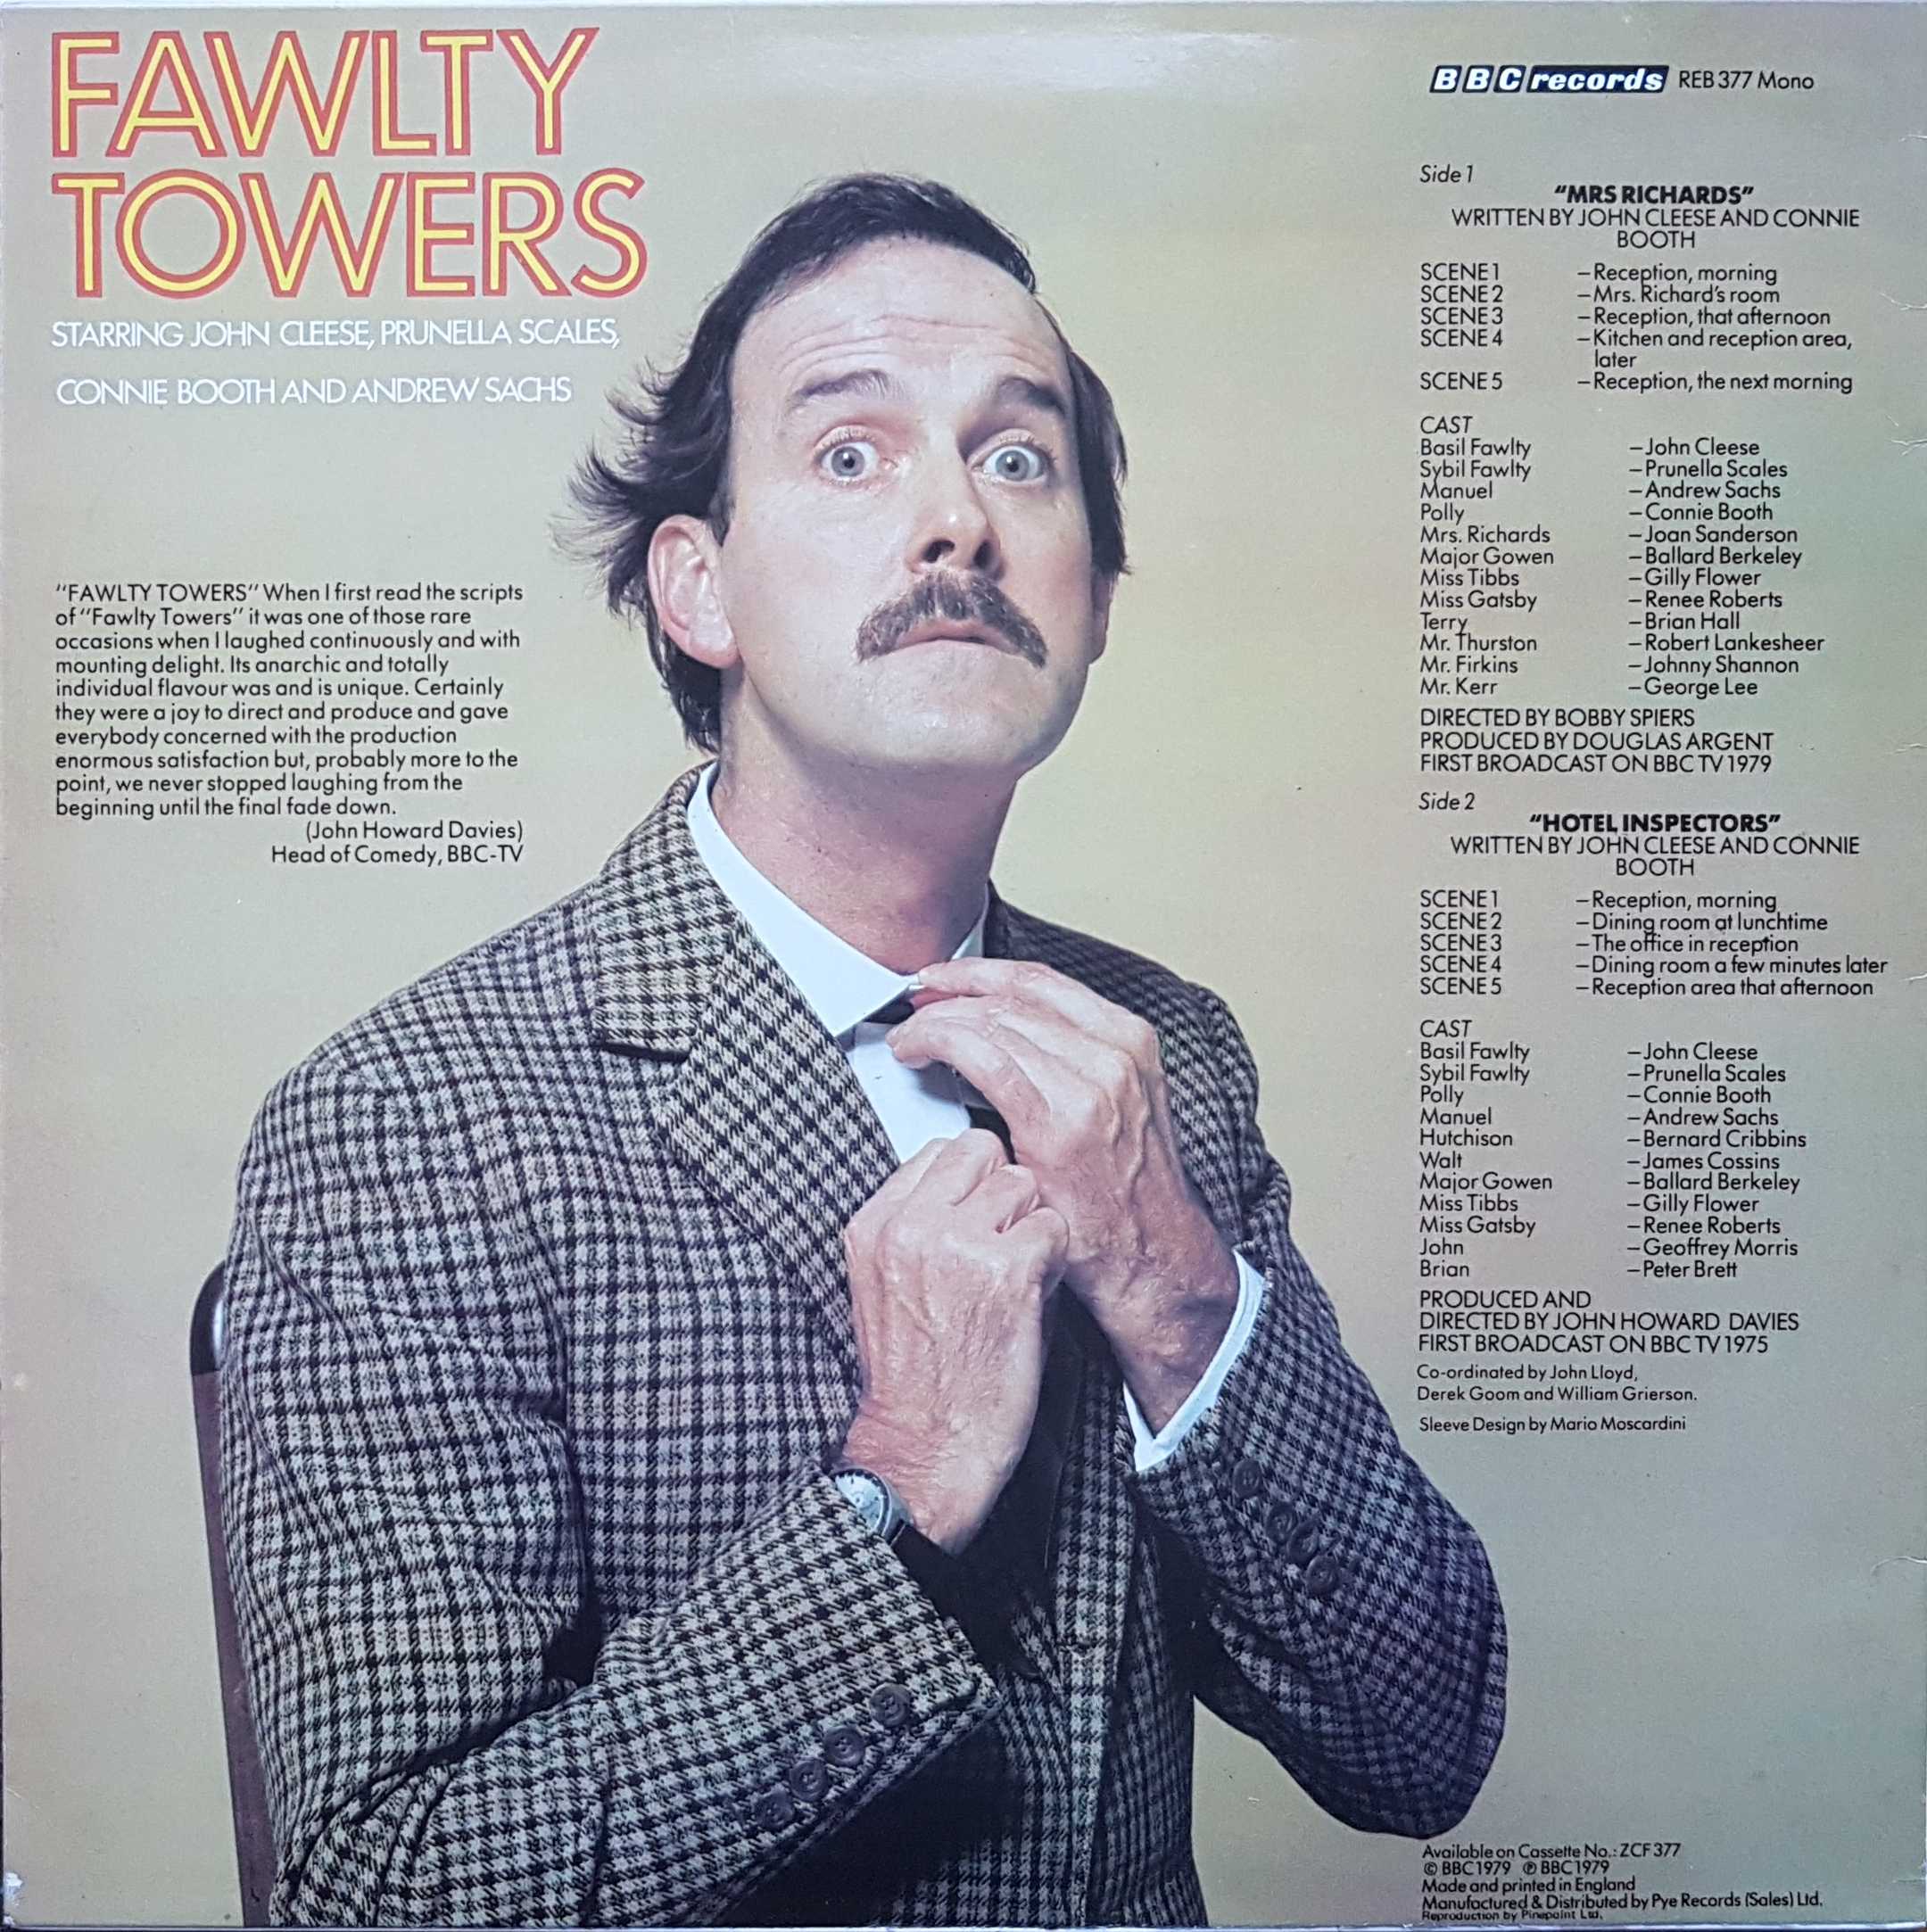 Picture of REB 377 Fawlty Towers by artist John Cleese / Connie Booth from the BBC records and Tapes library